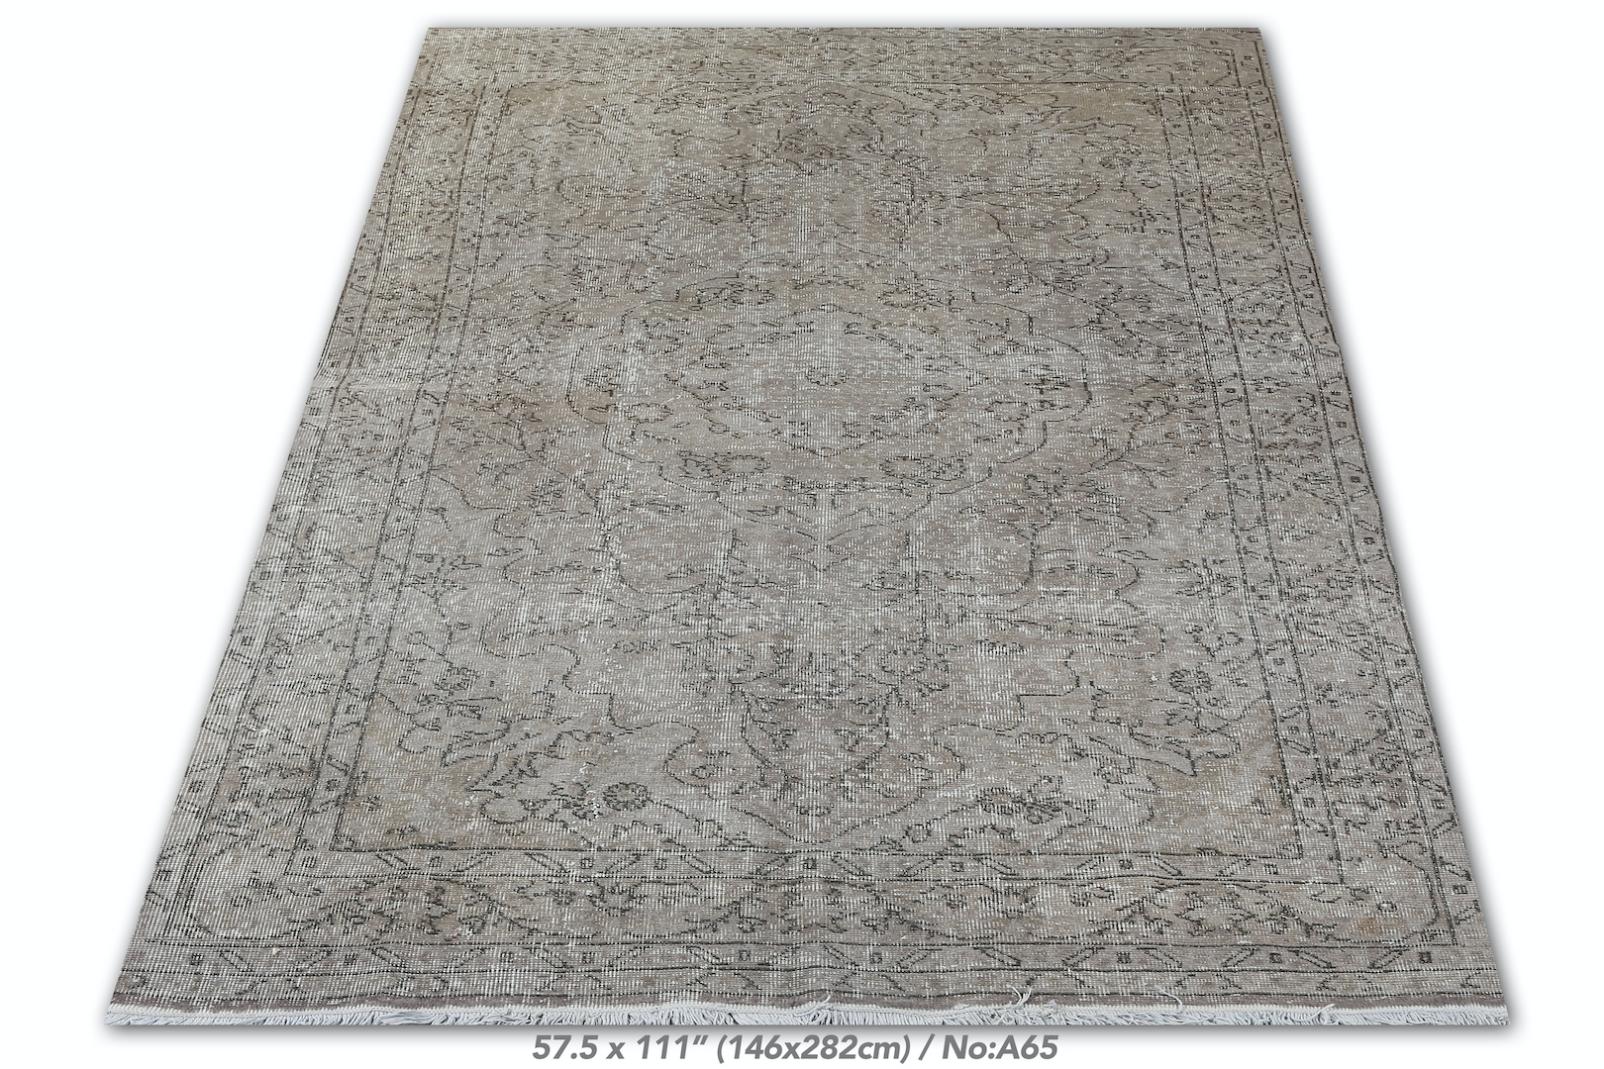 5x9.3 Ft Handmade Vintage Garden-Themed Turkish Wool Rug in Light Taupe Gray In Good Condition For Sale In Philadelphia, PA